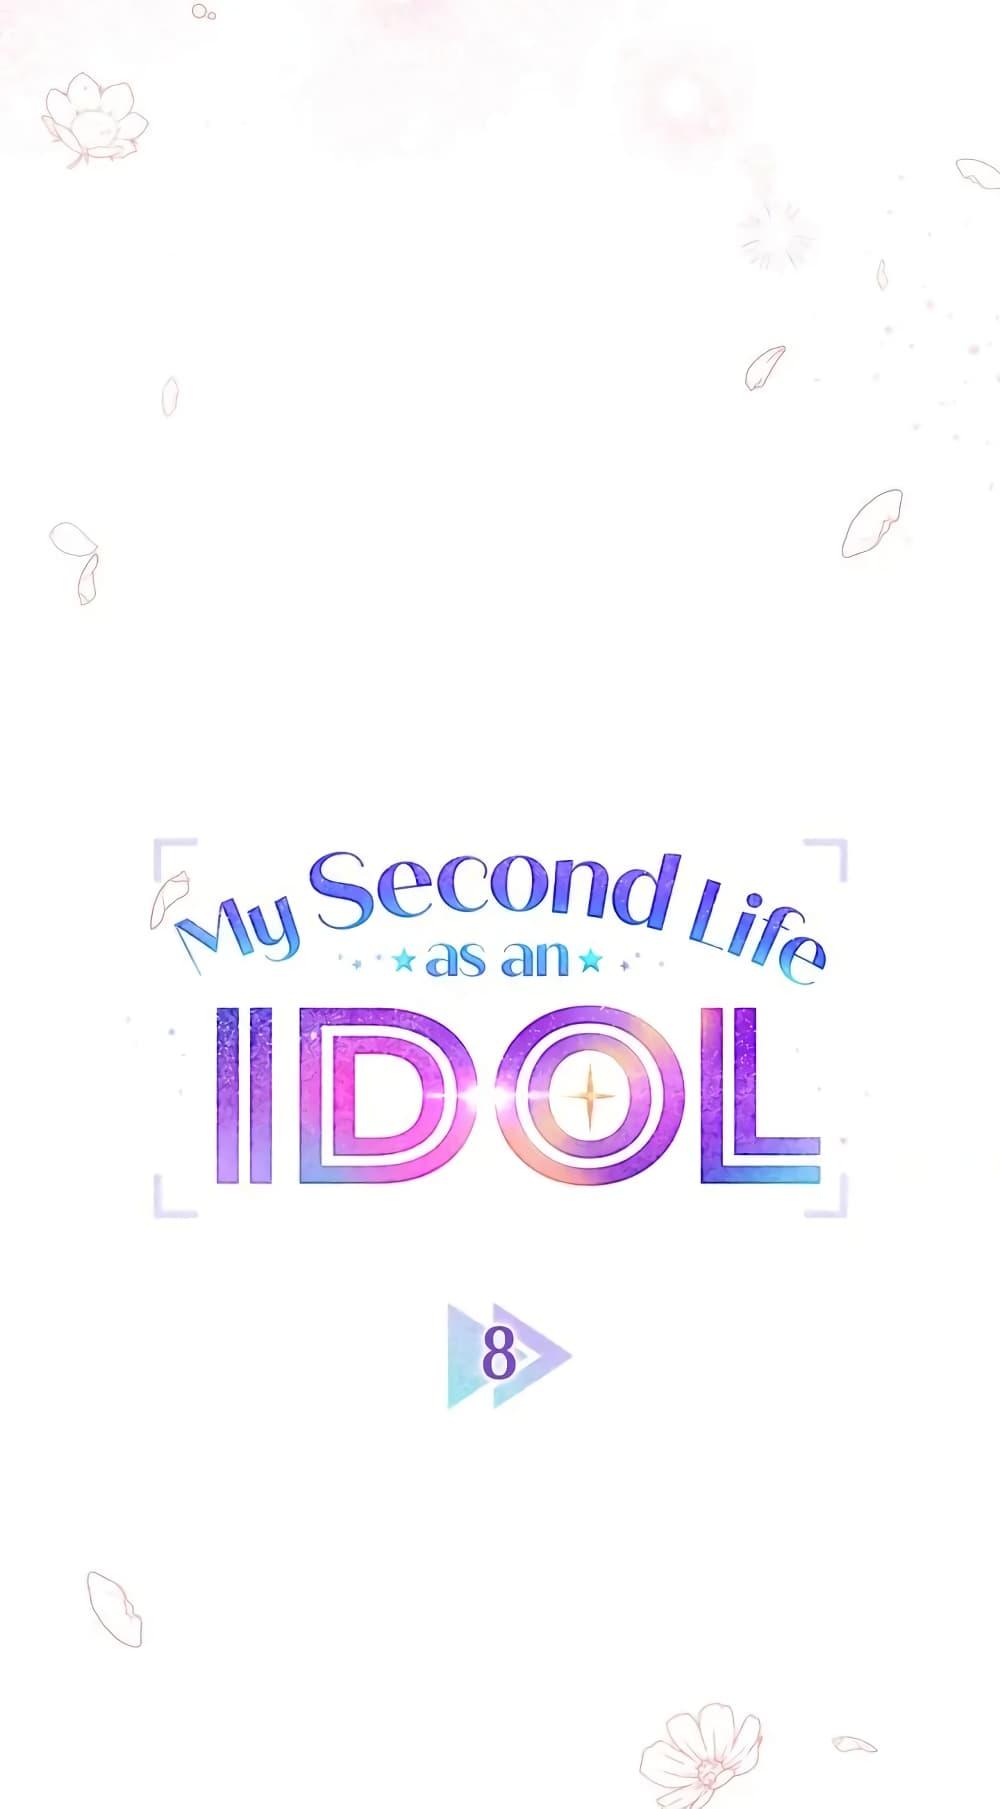 My Second Life as an Idol 8 16